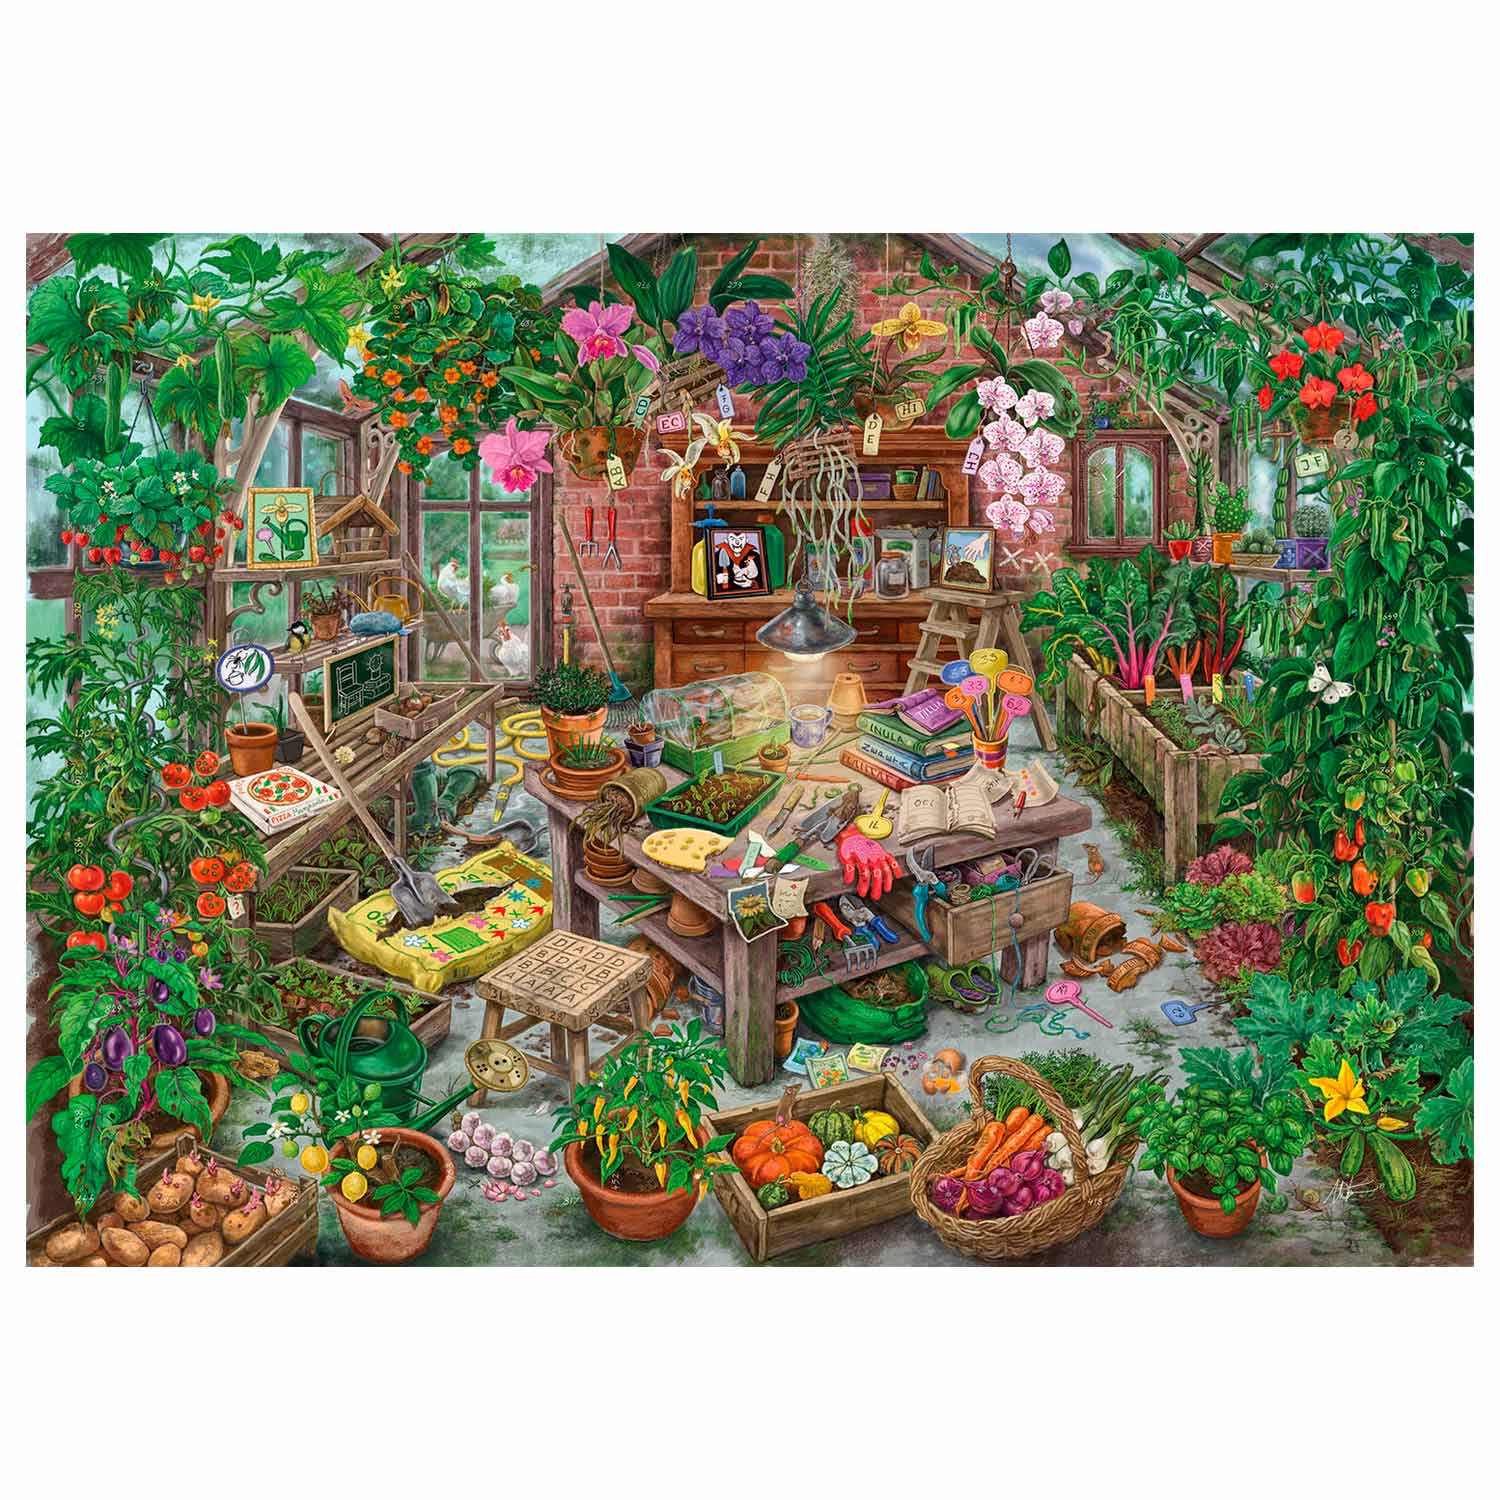 Ravensburger Escape Room Puzzel - The Green House, 368st.